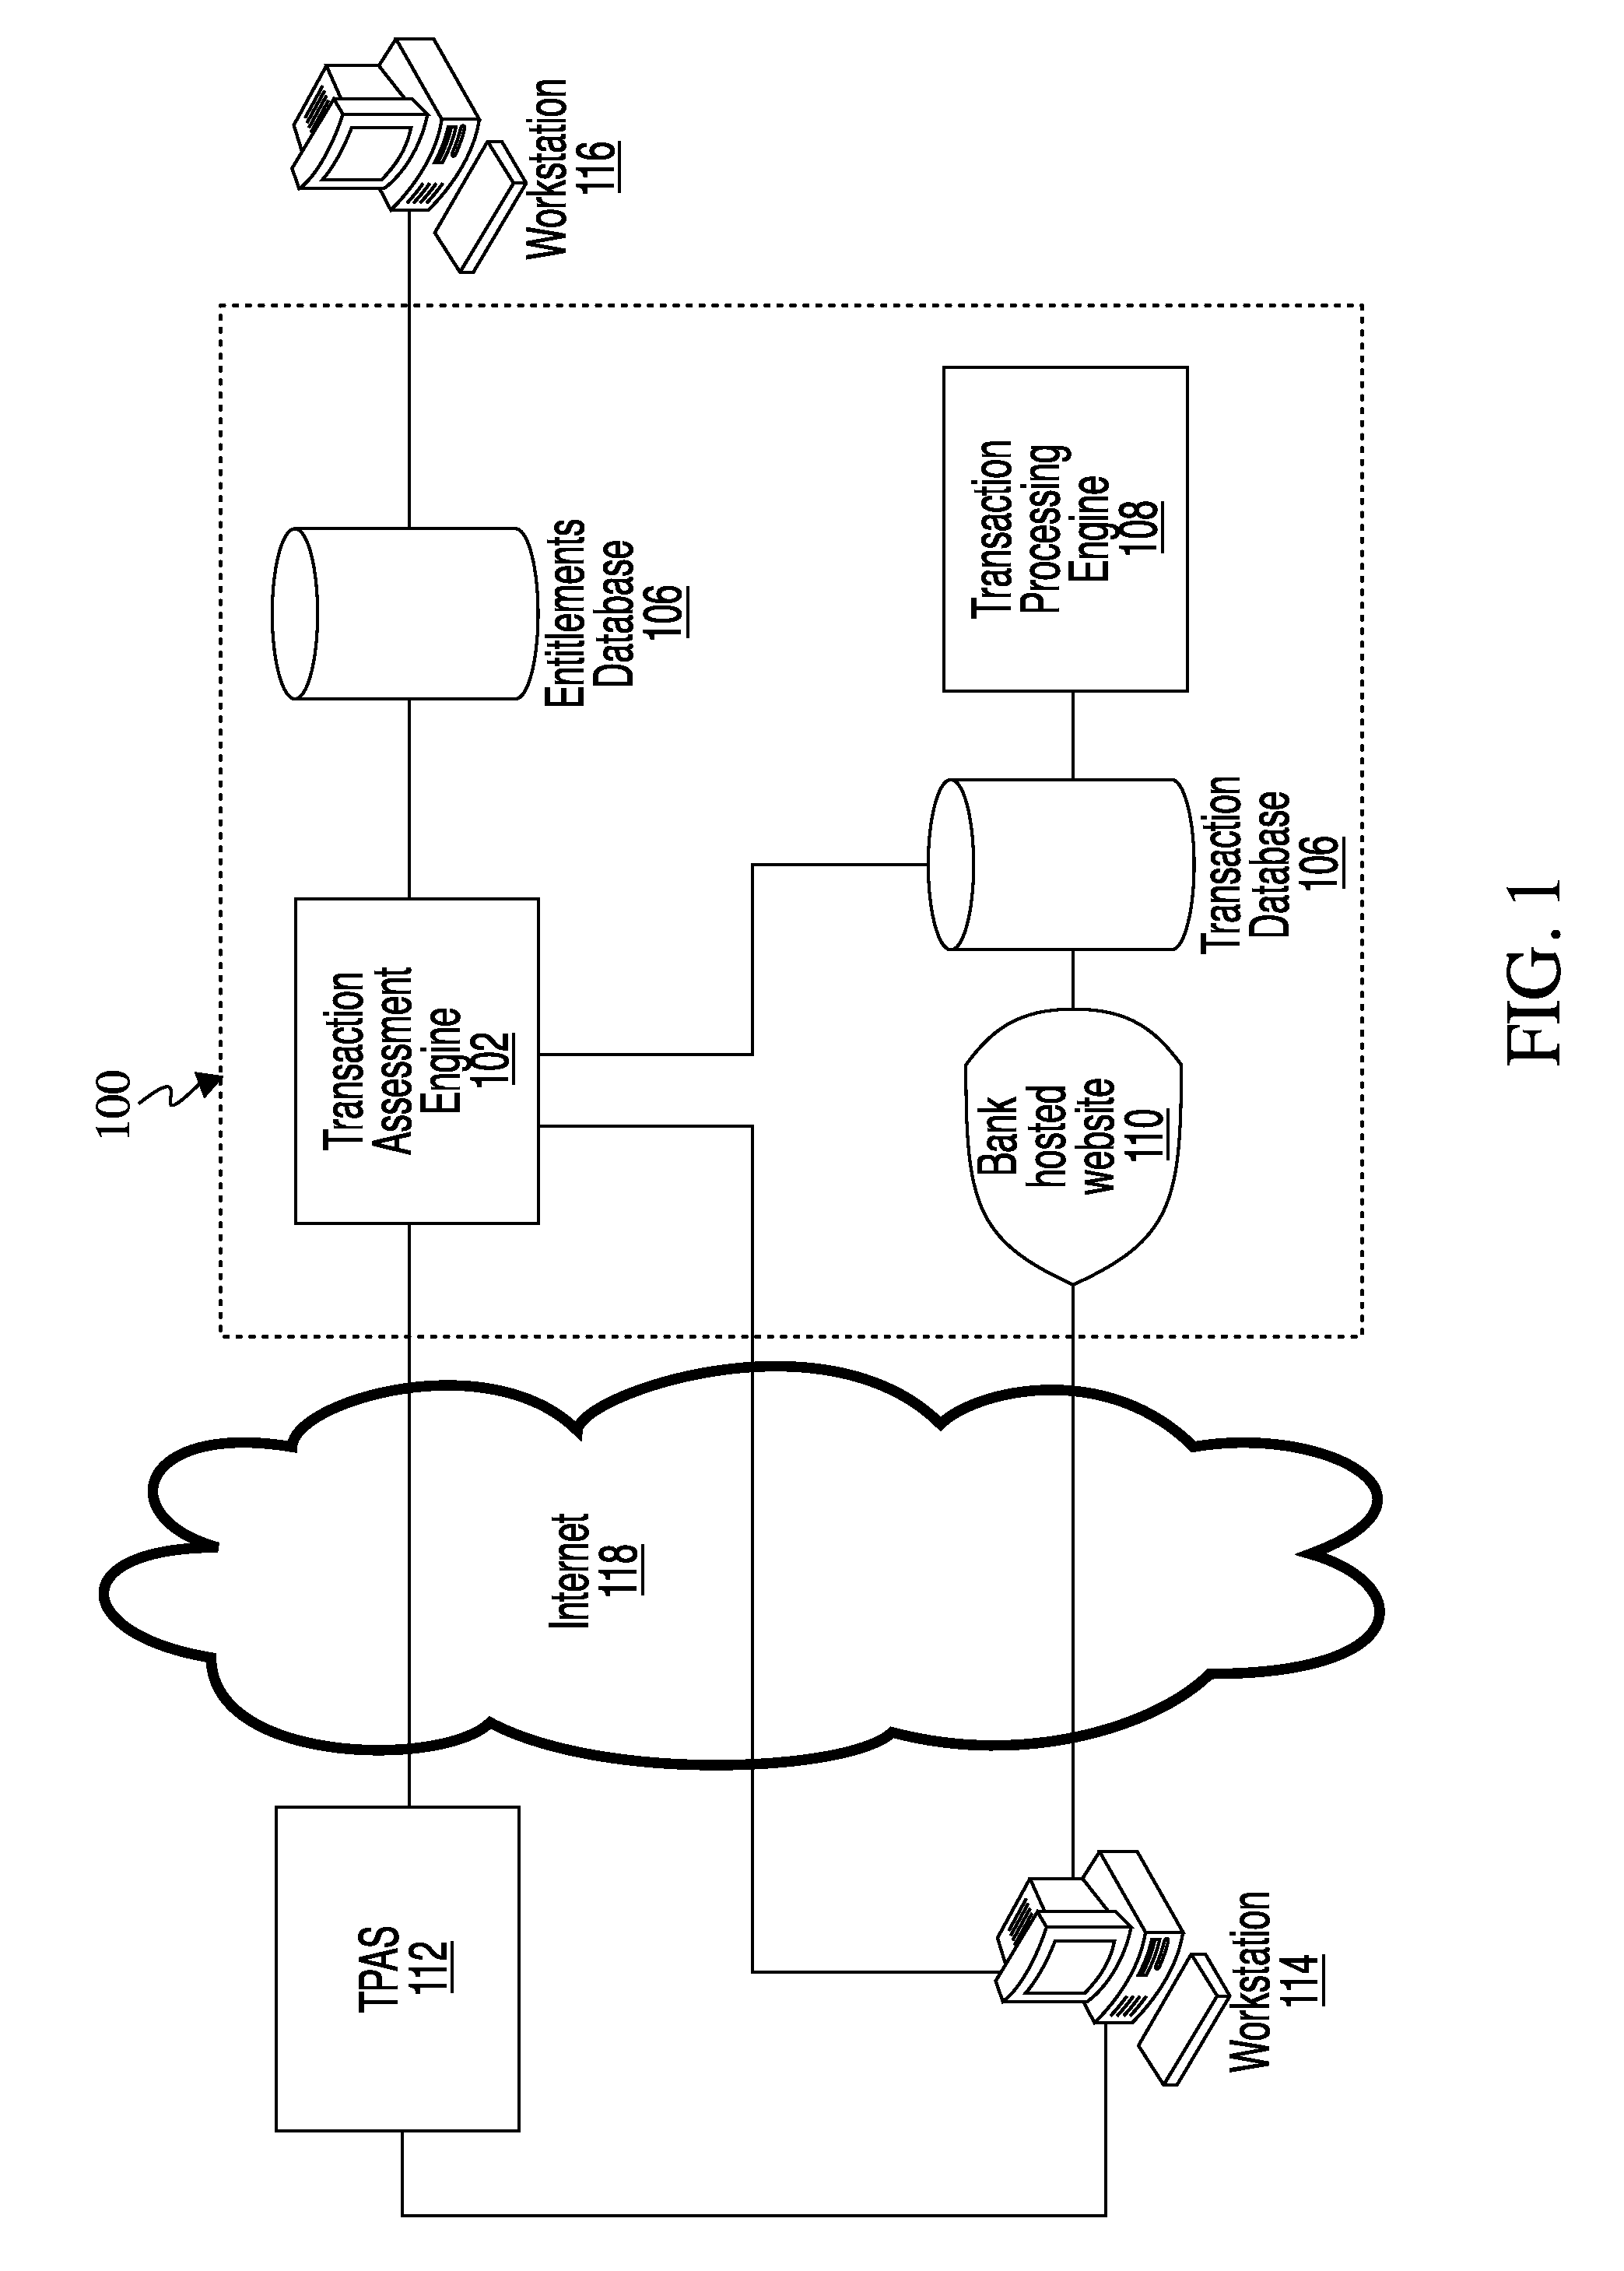 Systems and Methods for Processing Banking Transactions